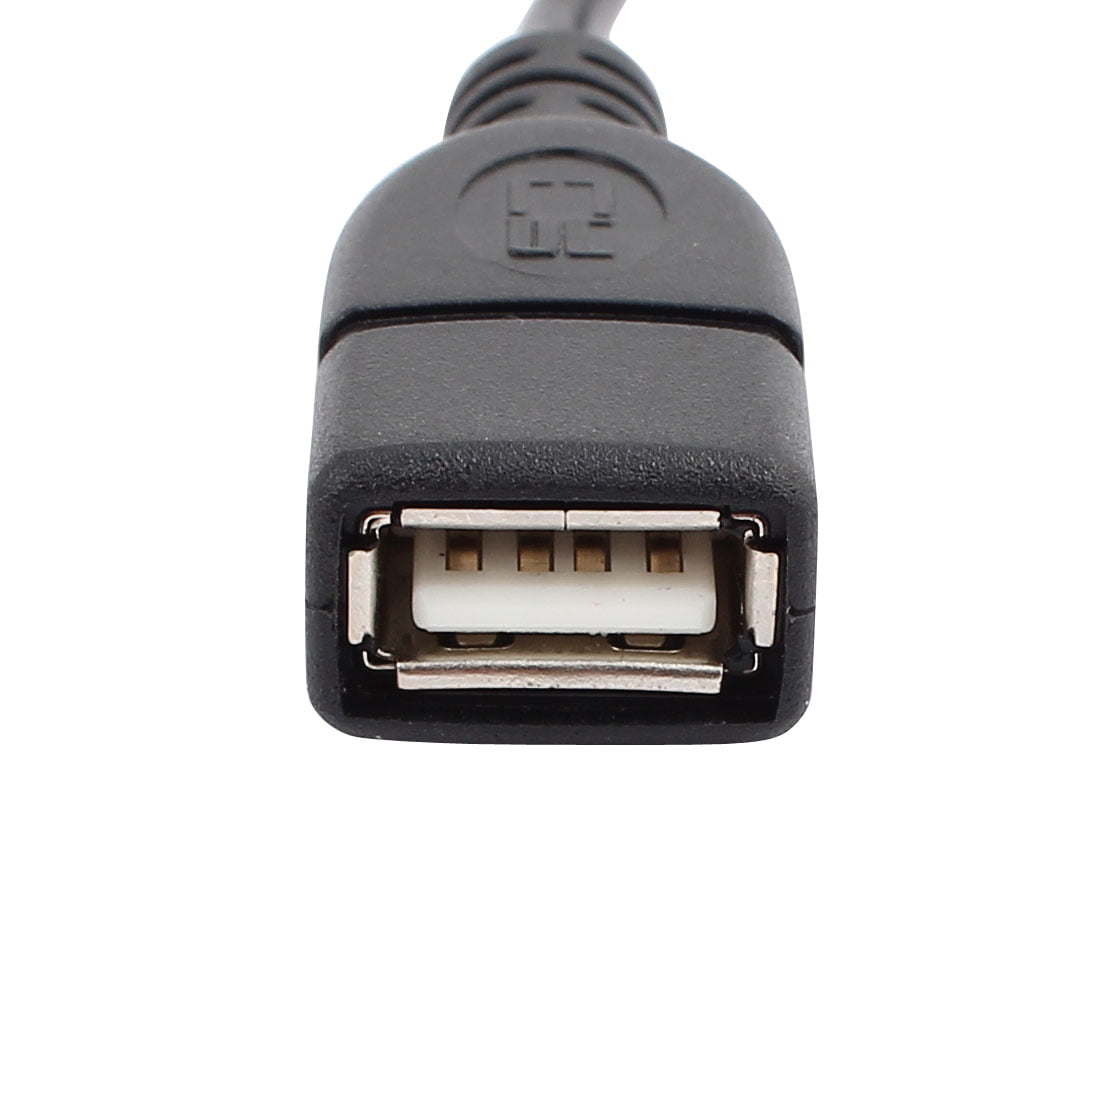 PAIR left right 90D Angled Micro USB B male to USB A female Host OTG adapters 